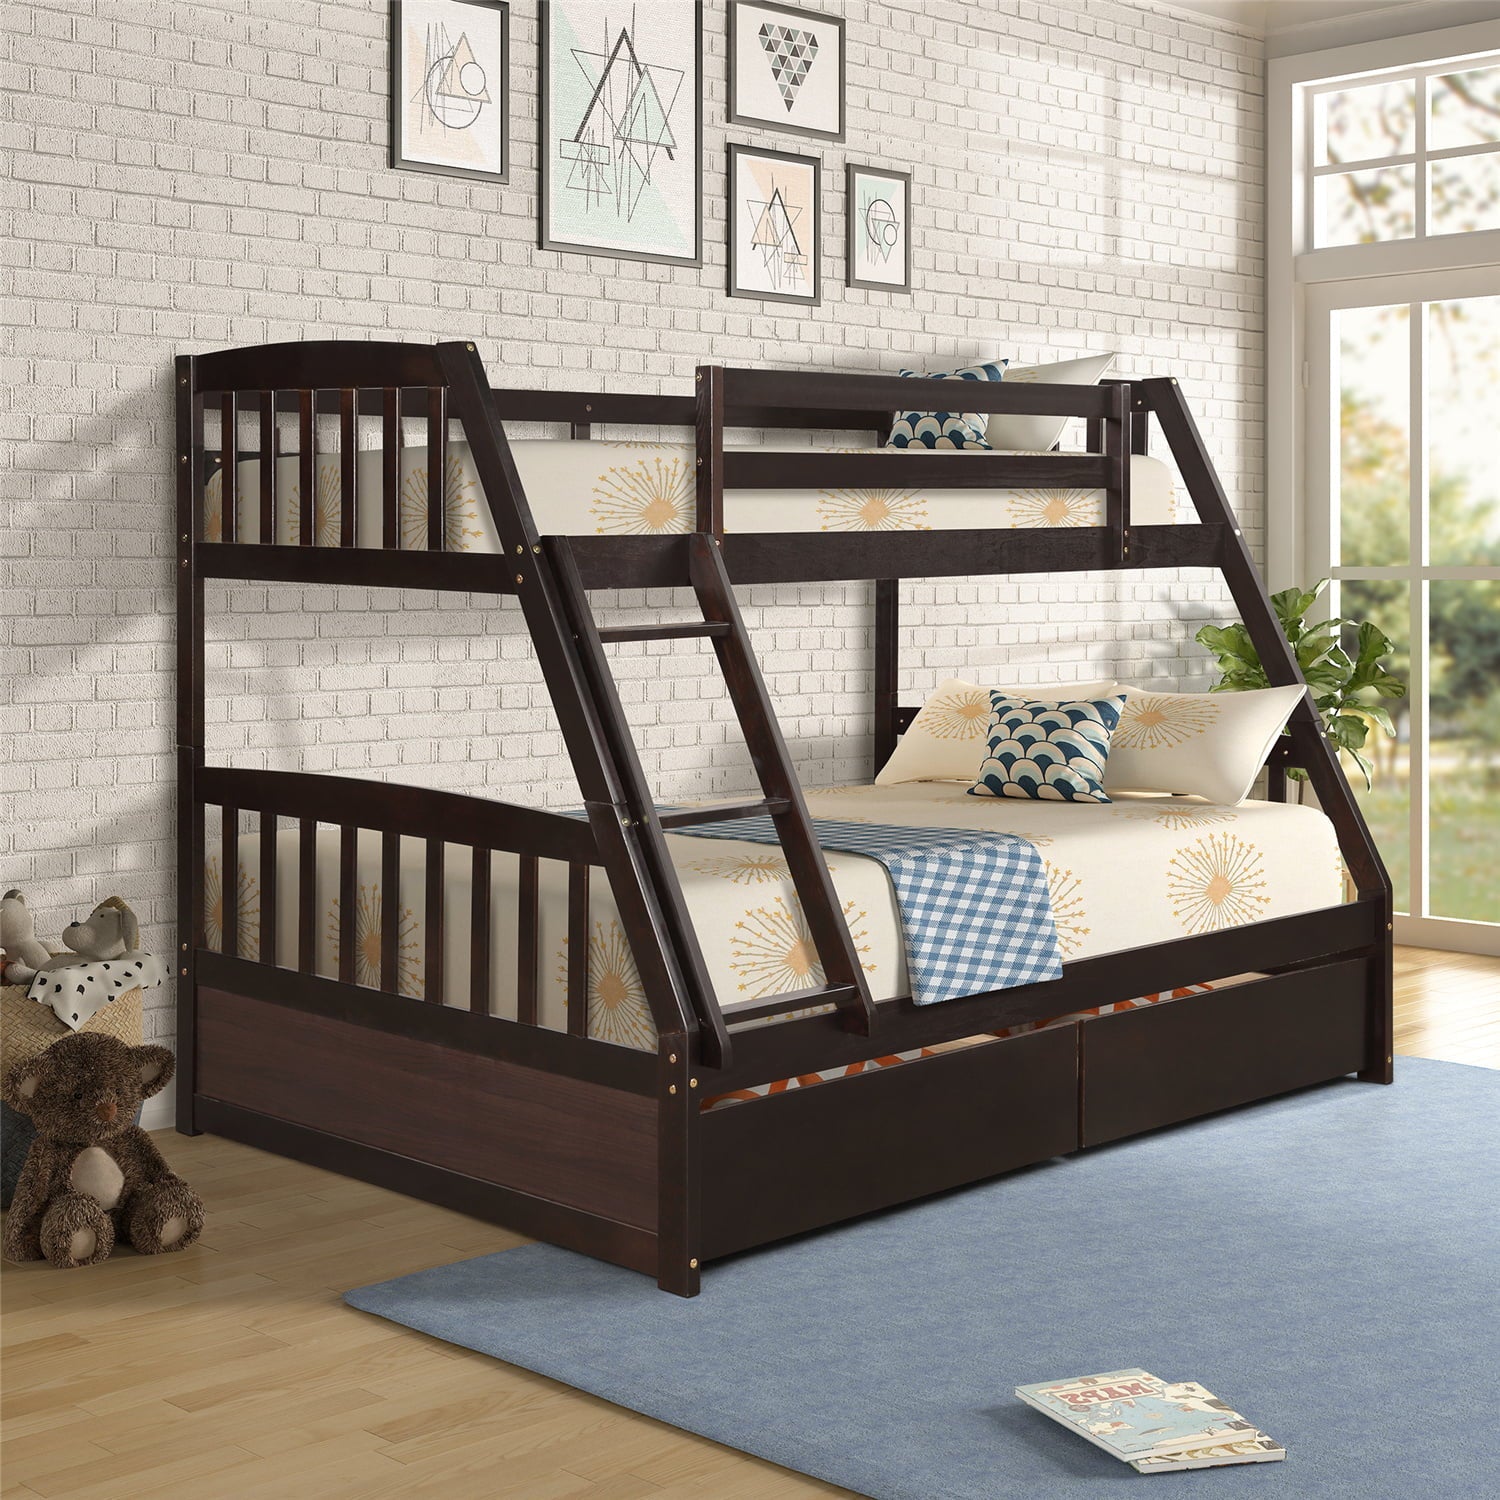 Twin Over Full Bunk Bed with Two Storage Drawers, Pine Wood Bed Frame and Ladder with Guard Rails for Toddlers, Kids, Teens, Boys and Girls, Espresso